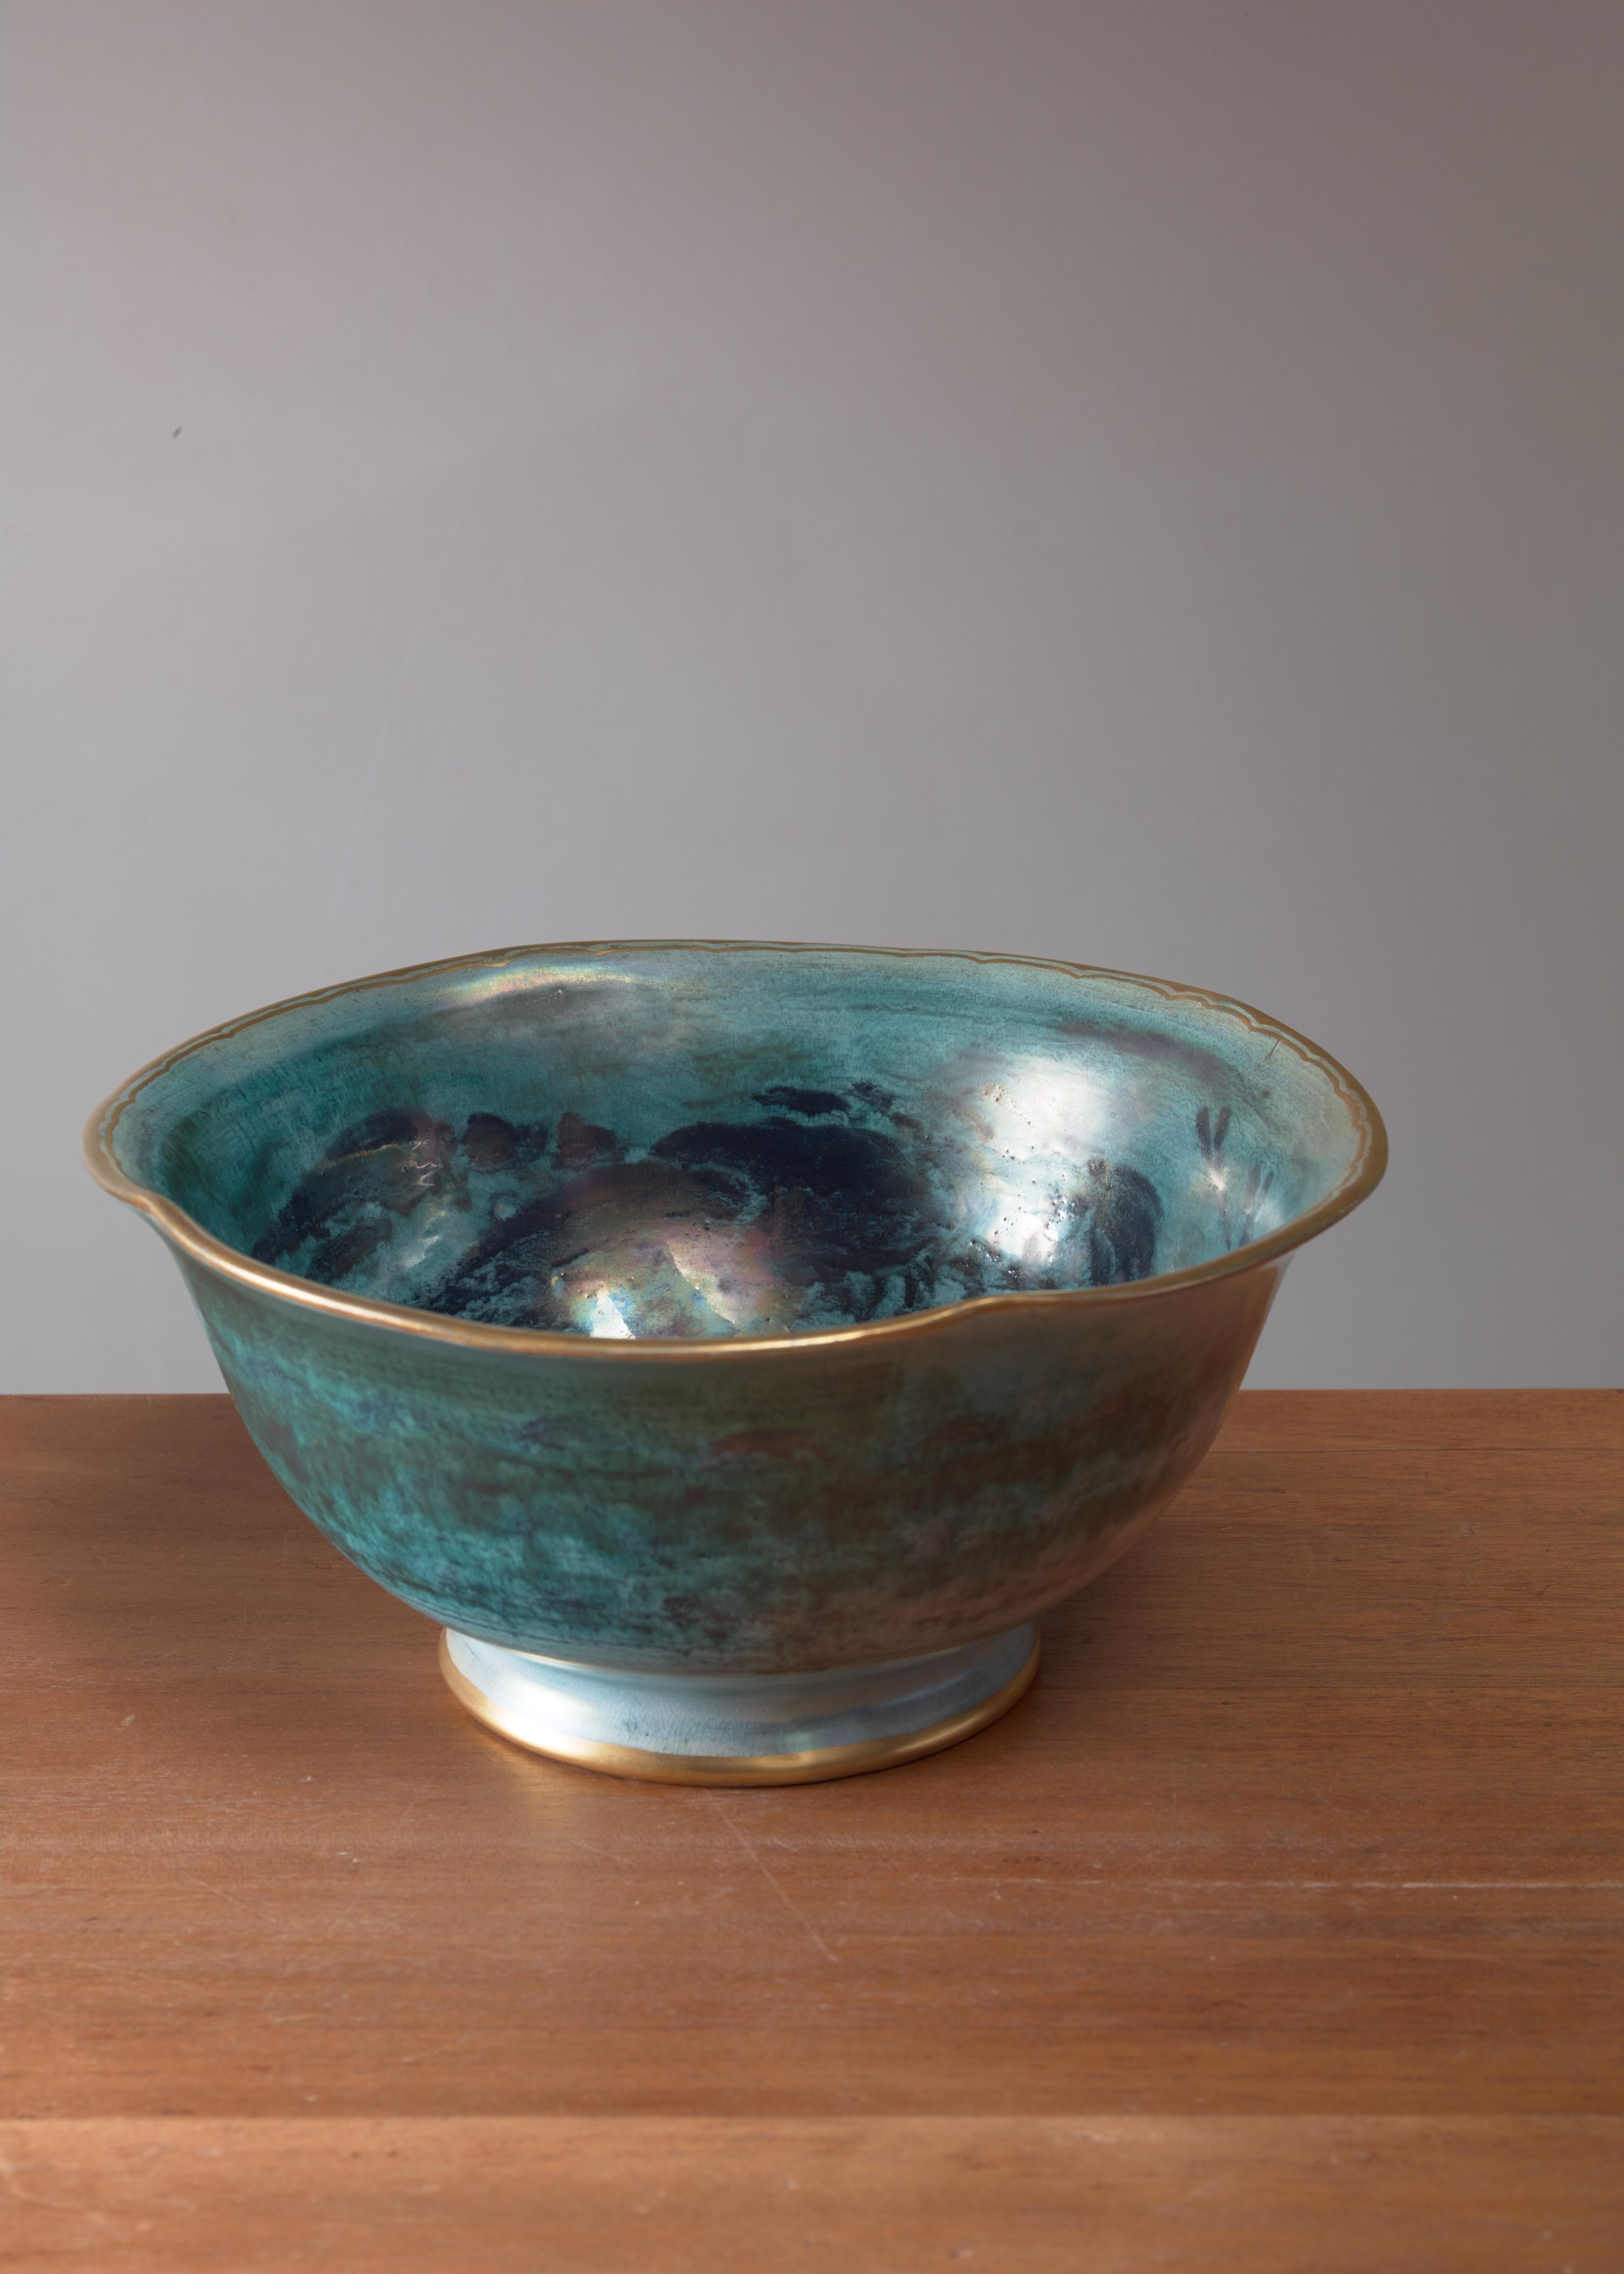 A large ceramic lustreware bowl by Josef Ekberg for Gustavsberg. The bowl has a gilt edge and is decorated with a seaweed and lobster motif.
Signed by Ekberg and Gustavsberg, with the year of production (1929).
 